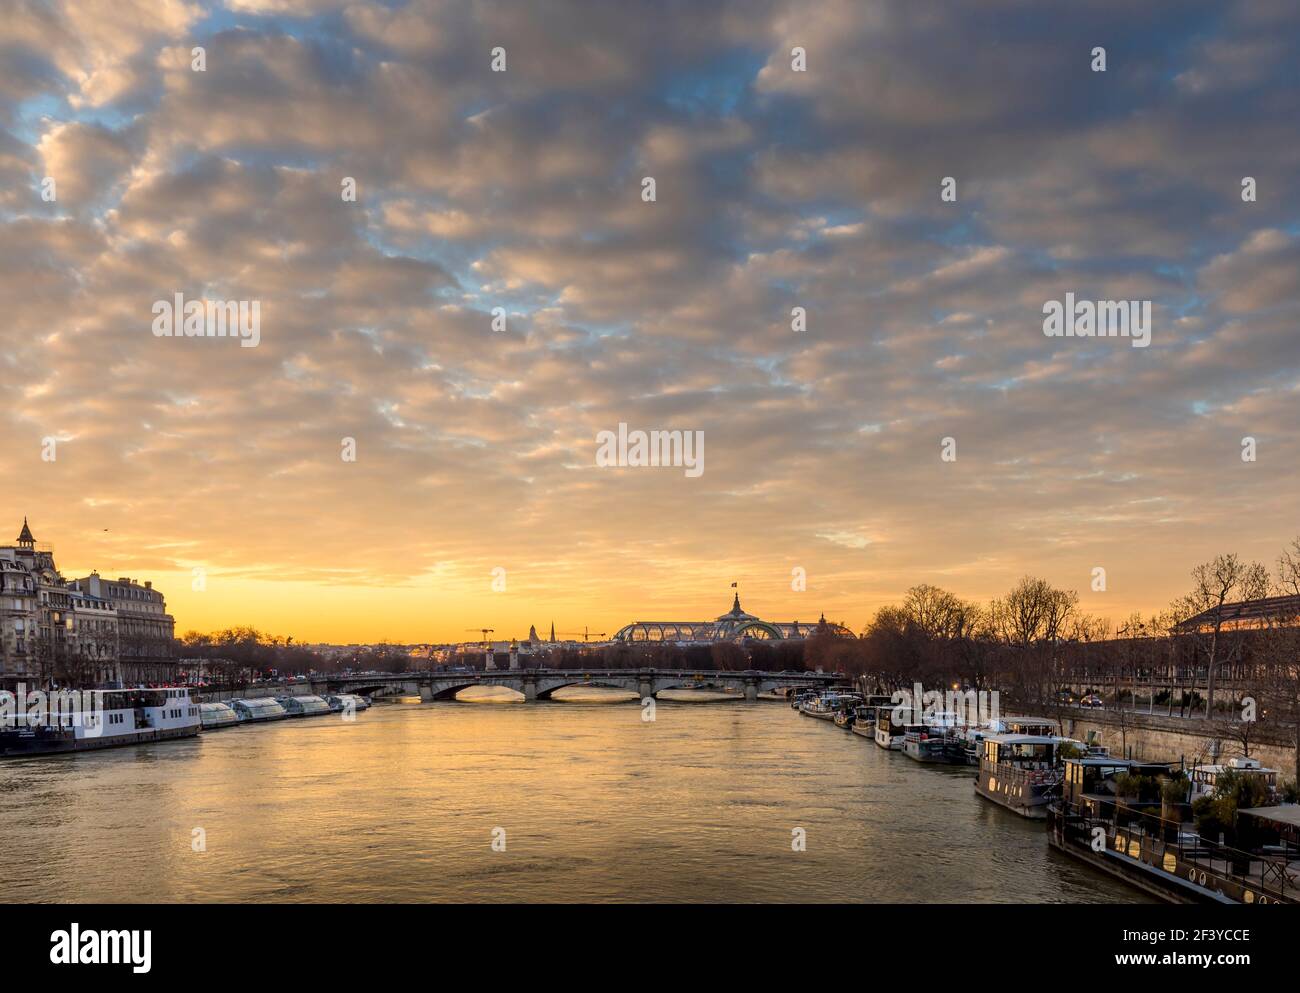 Paris, France - February 12, 2021: Seine river and Grand Palais in background with a beautiful cloudy sunset in Paris Stock Photo